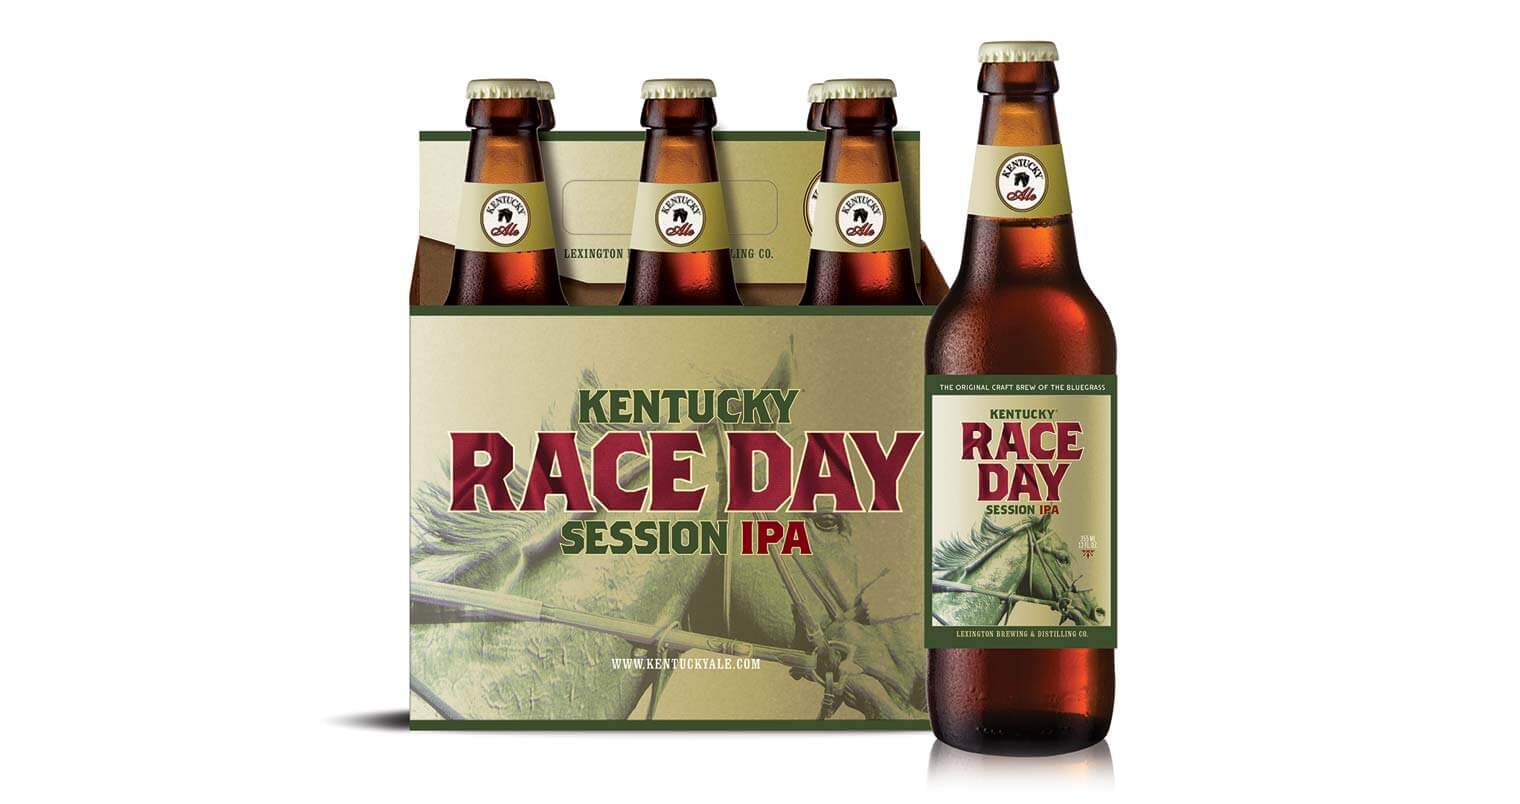 Lexington Brewing Releases Kentucky Race Day Session IPA, beer news, featured image